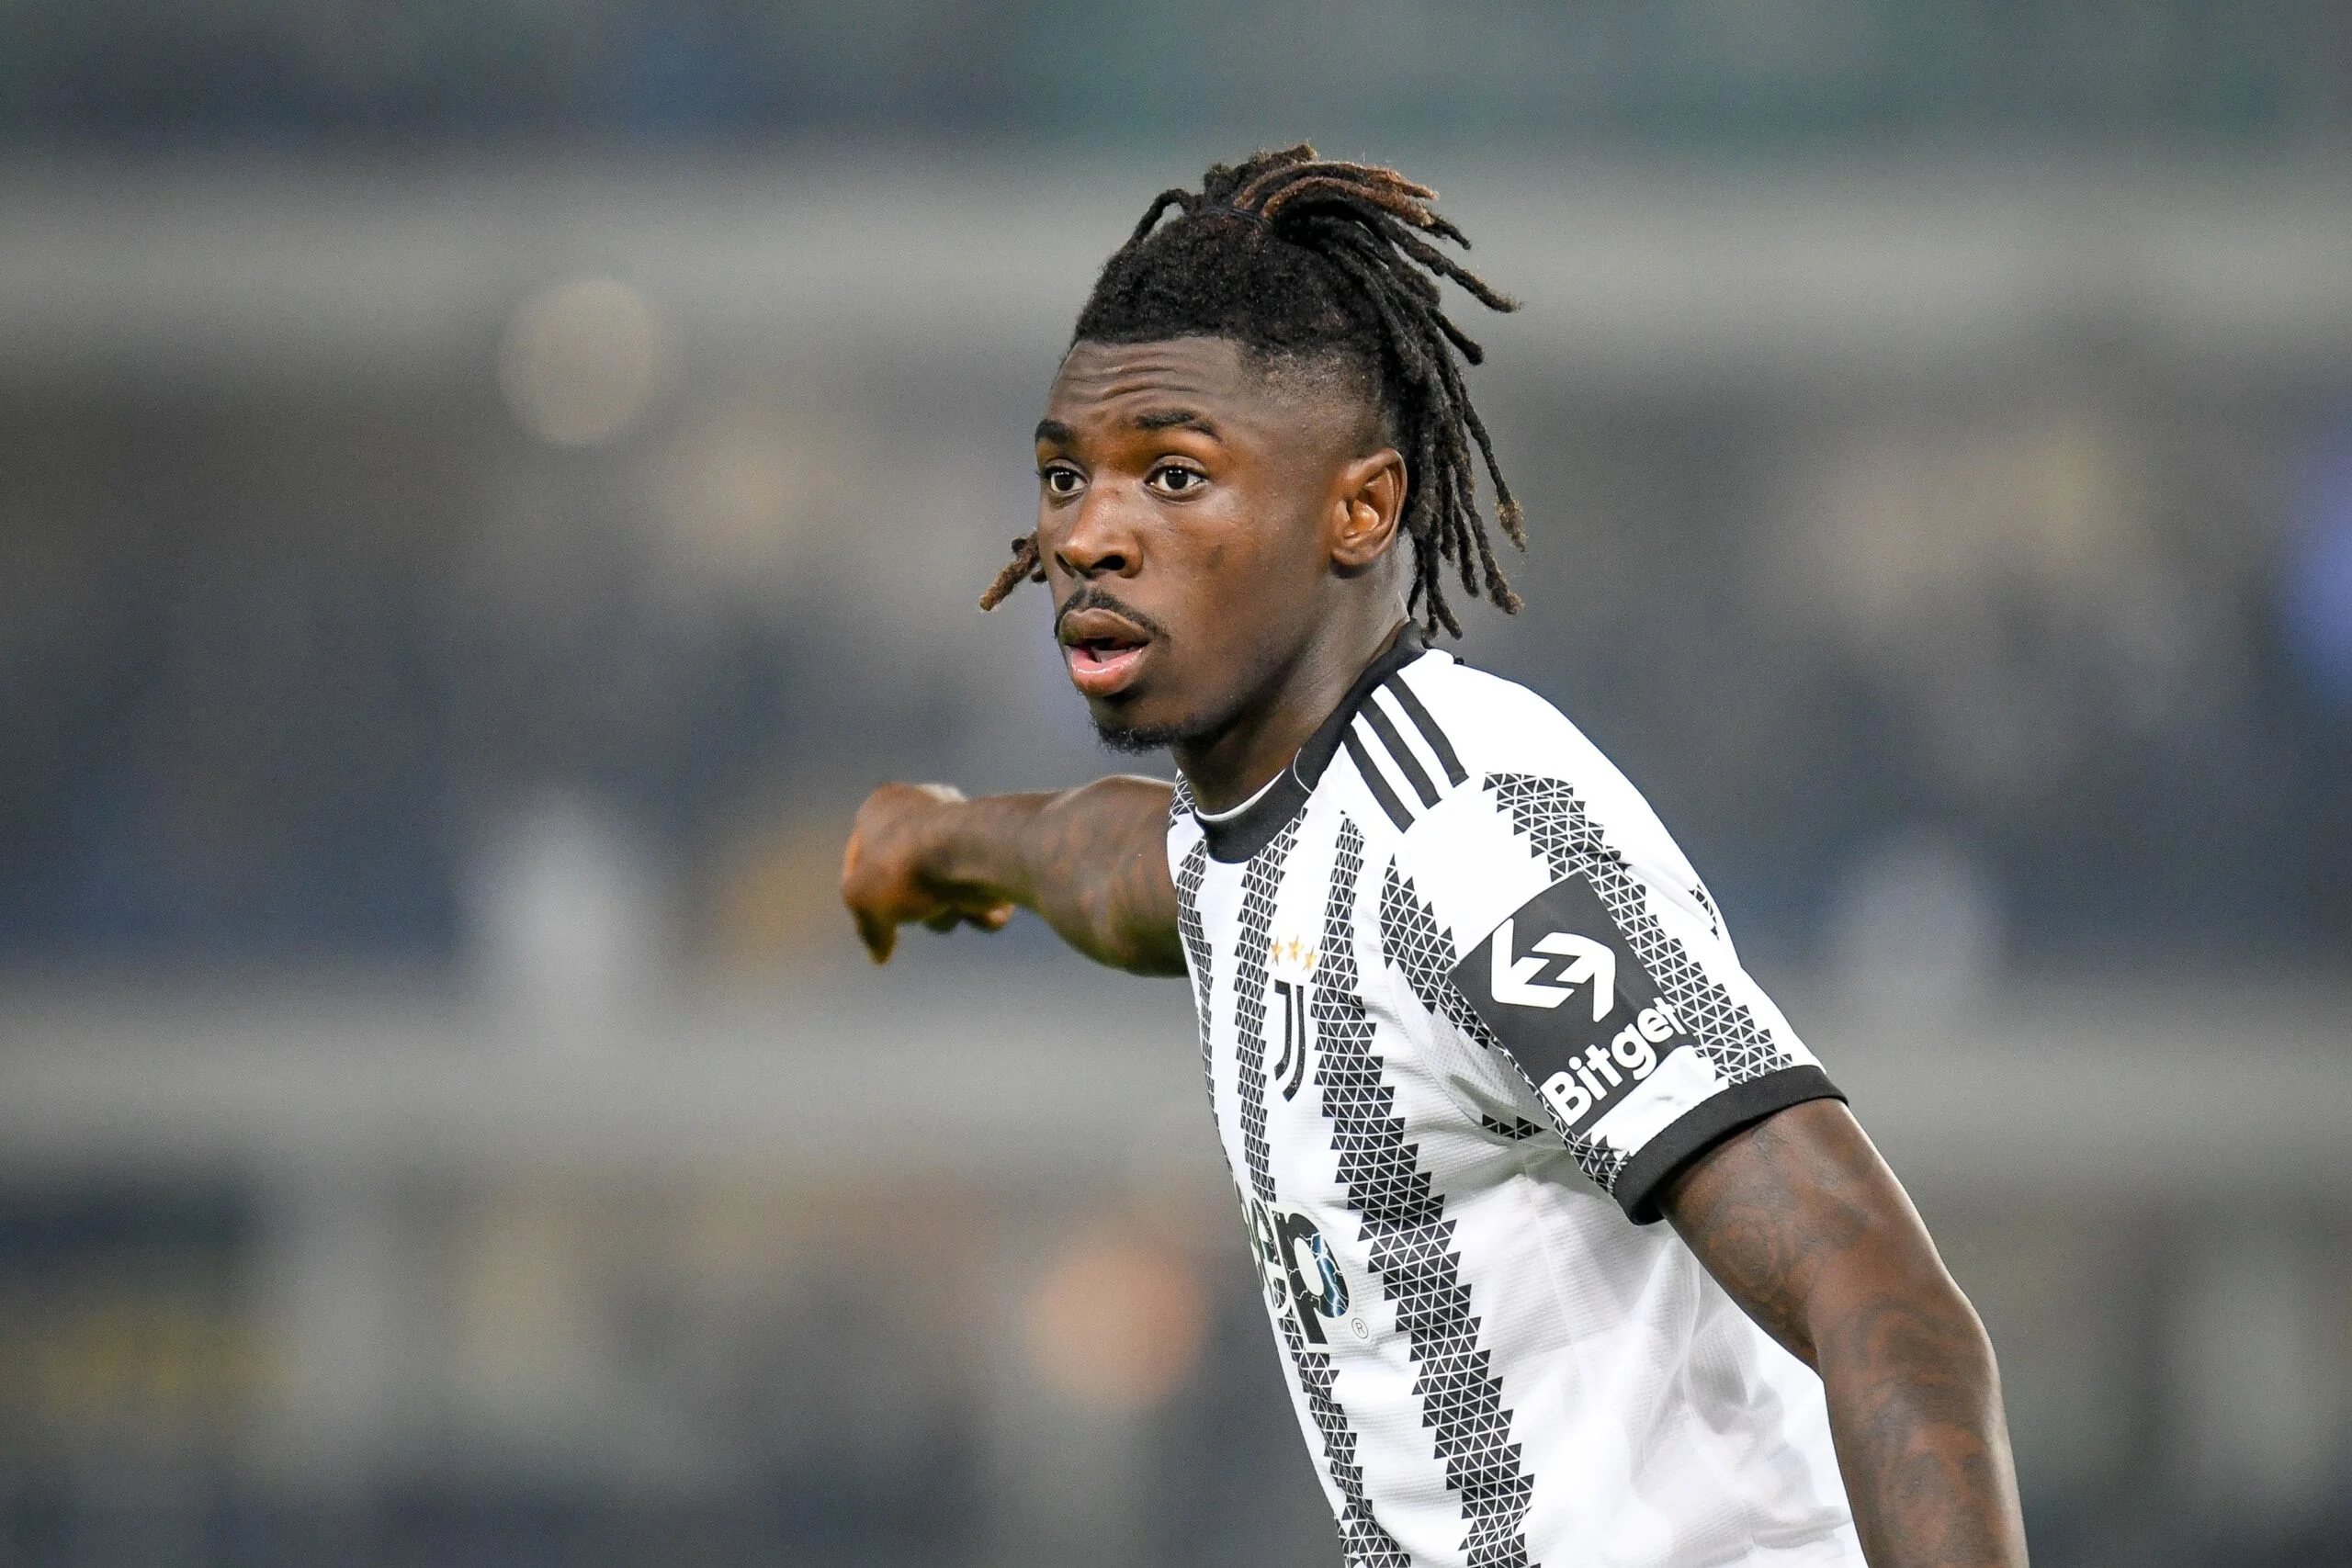 Moise Kean will report back to Juventus as Atletico Madrid decided to nix the move after the medicals. The striker has spent a few days in Spain.